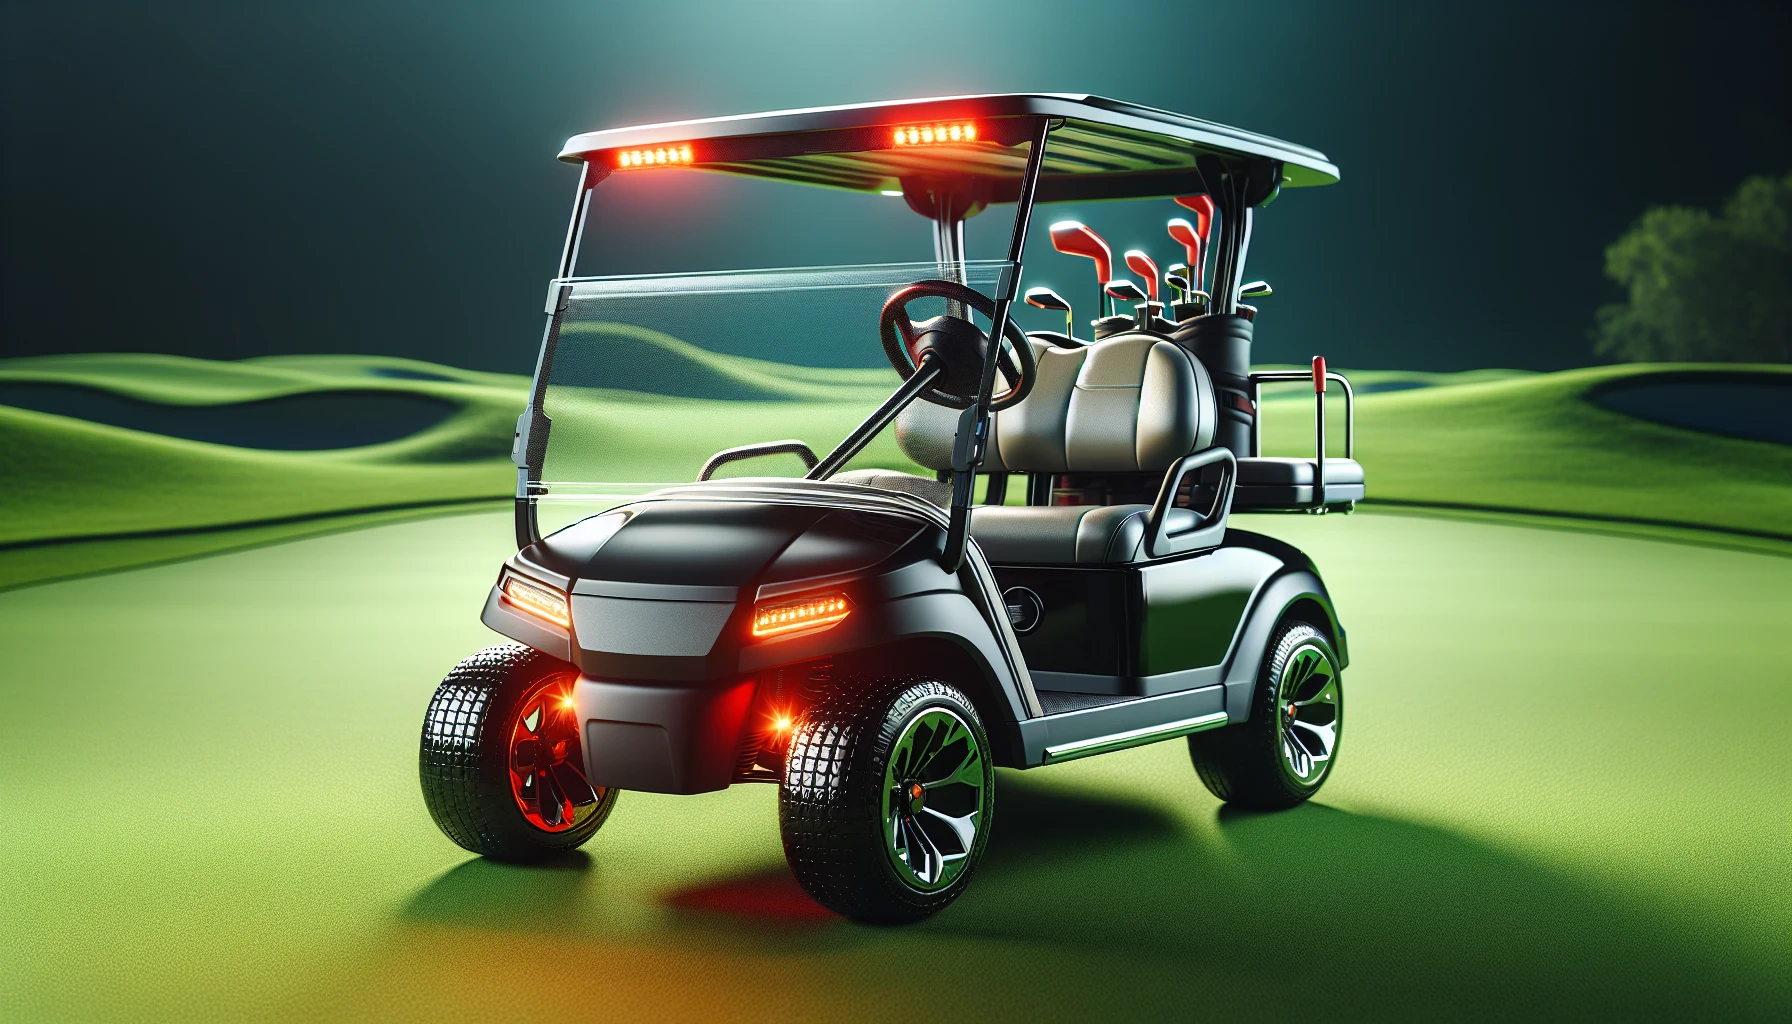 Golf cart safety features